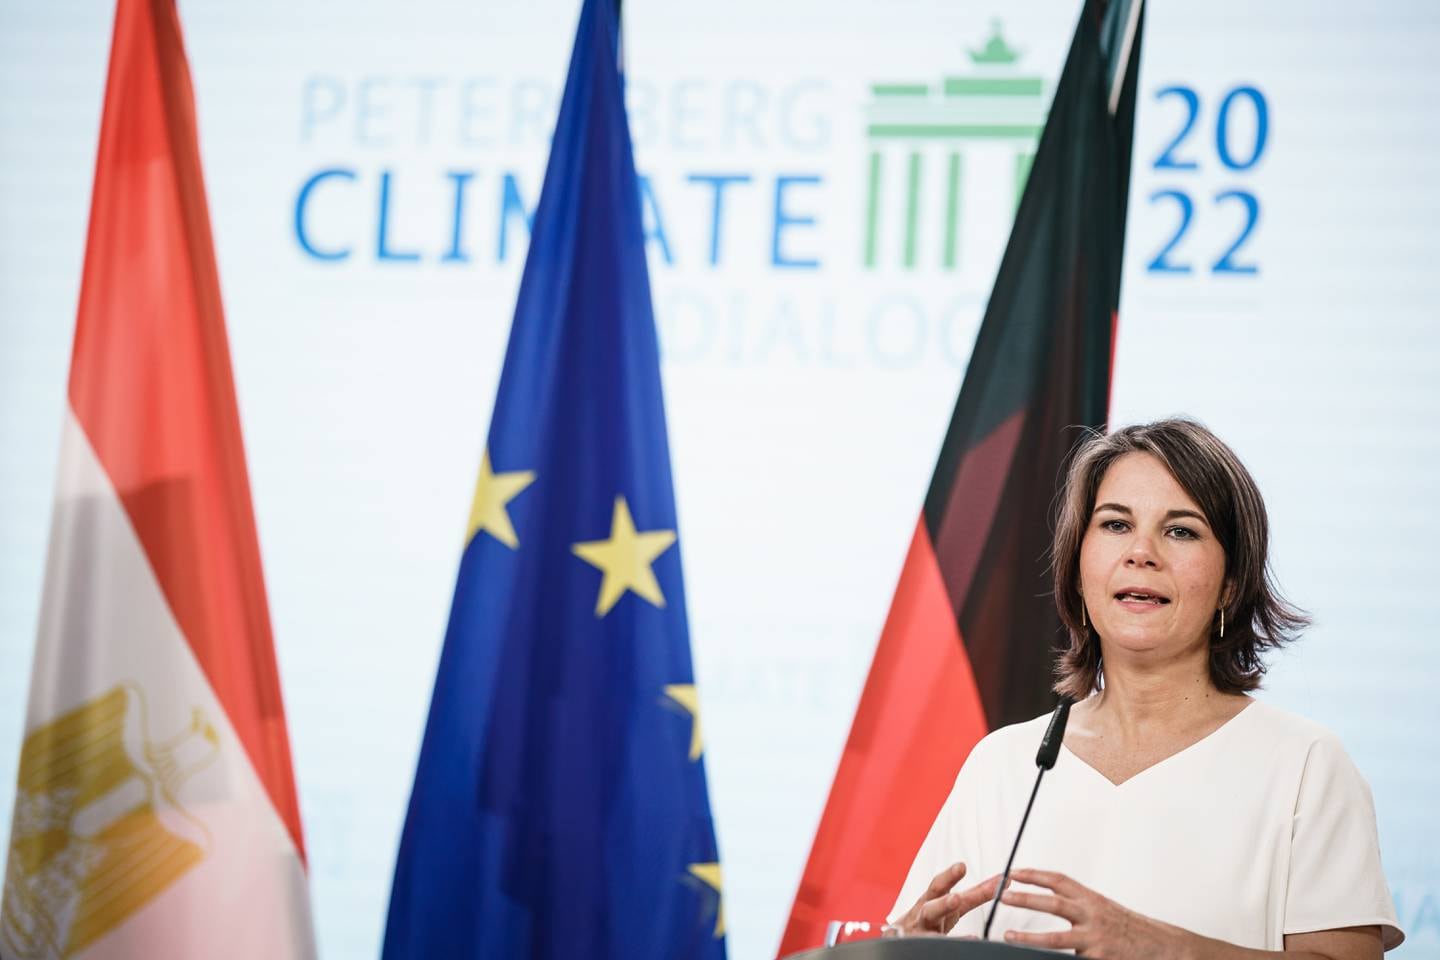 Annalena Baerbock, Germany's Minister of Foreign Affairs, at the Petersberg Climate Dialogue in Berlin. EPA